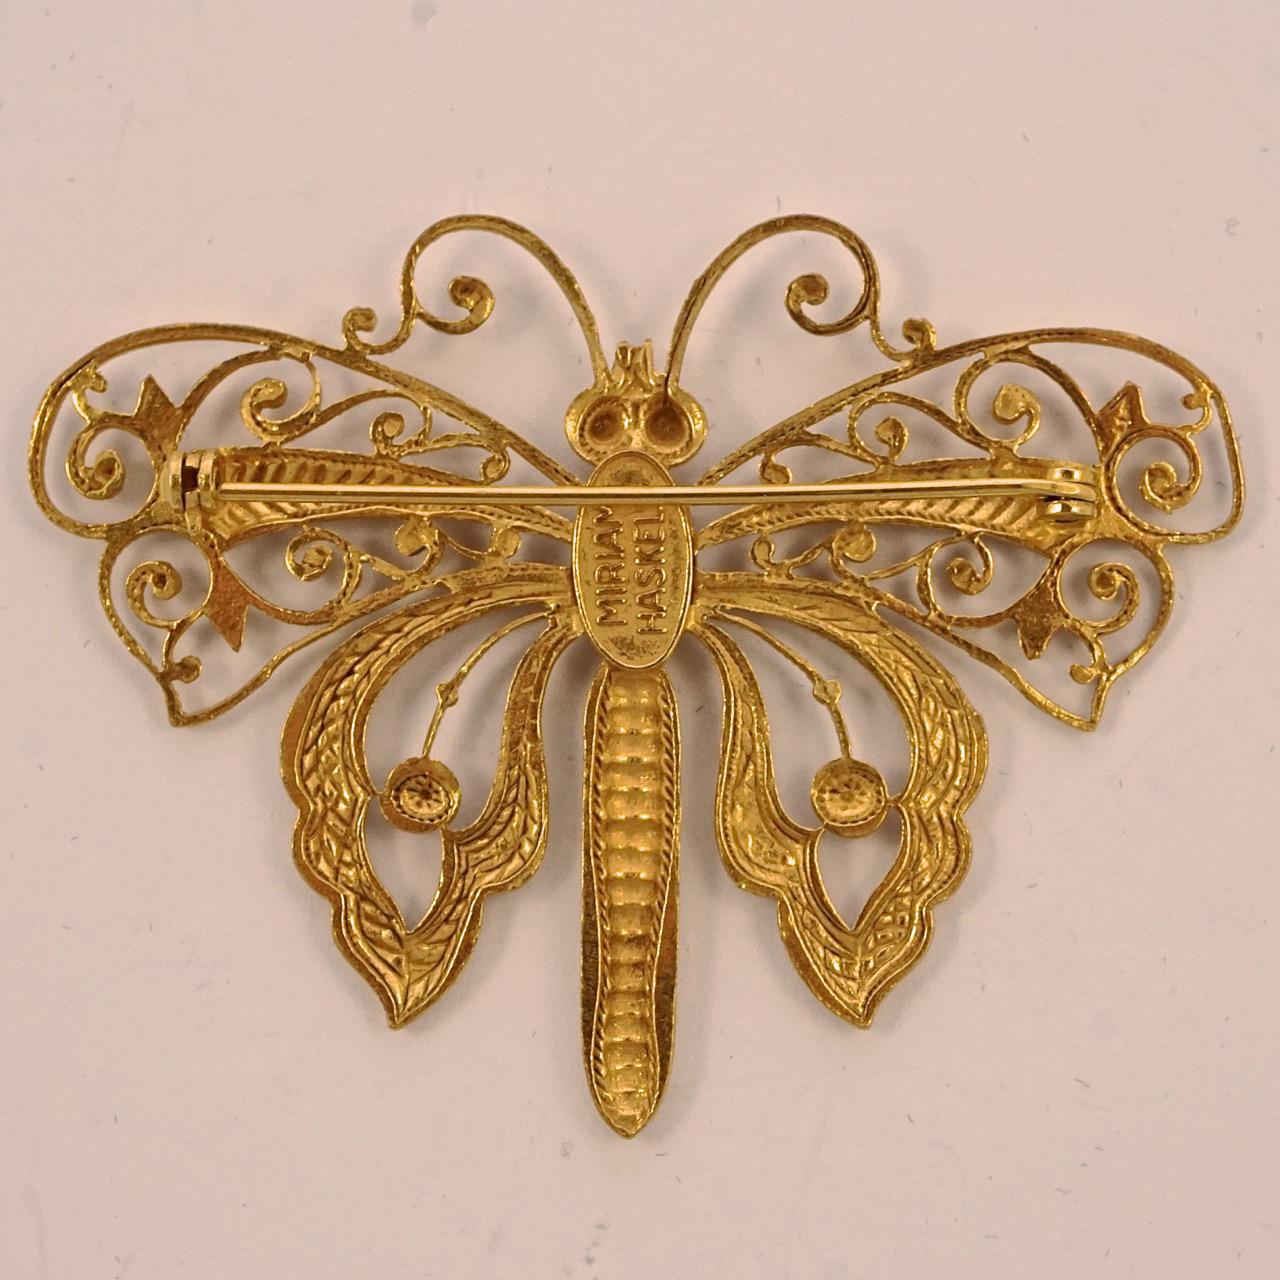 Miriam Haskell beautiful Russian gold plated ornate butterfly brooch. Measuring width 6.2 cm / 2.4 inches by length 4.7cm / 1.85 inches. The brooch is in very good condition.

This is a lovely butterfly brooch with the Haskell Russian gold patina.